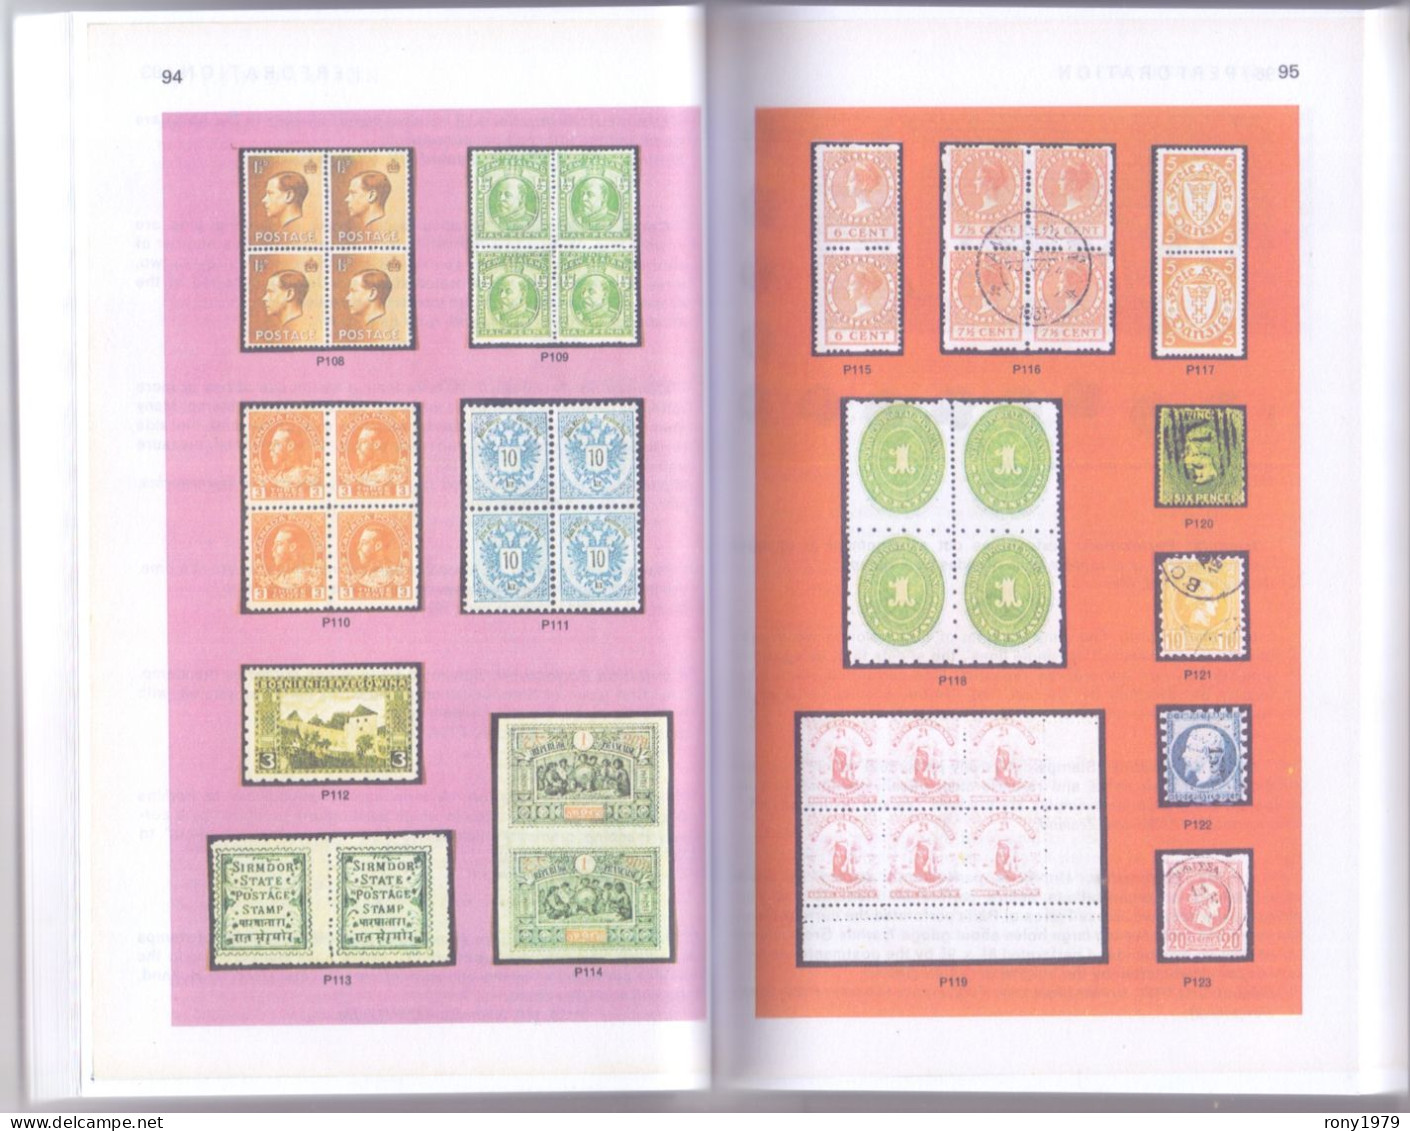 Philatelic Terms Illustrated Second Edition Book By Russell Bennett And James Watson (Color Copy) - Books On Collecting